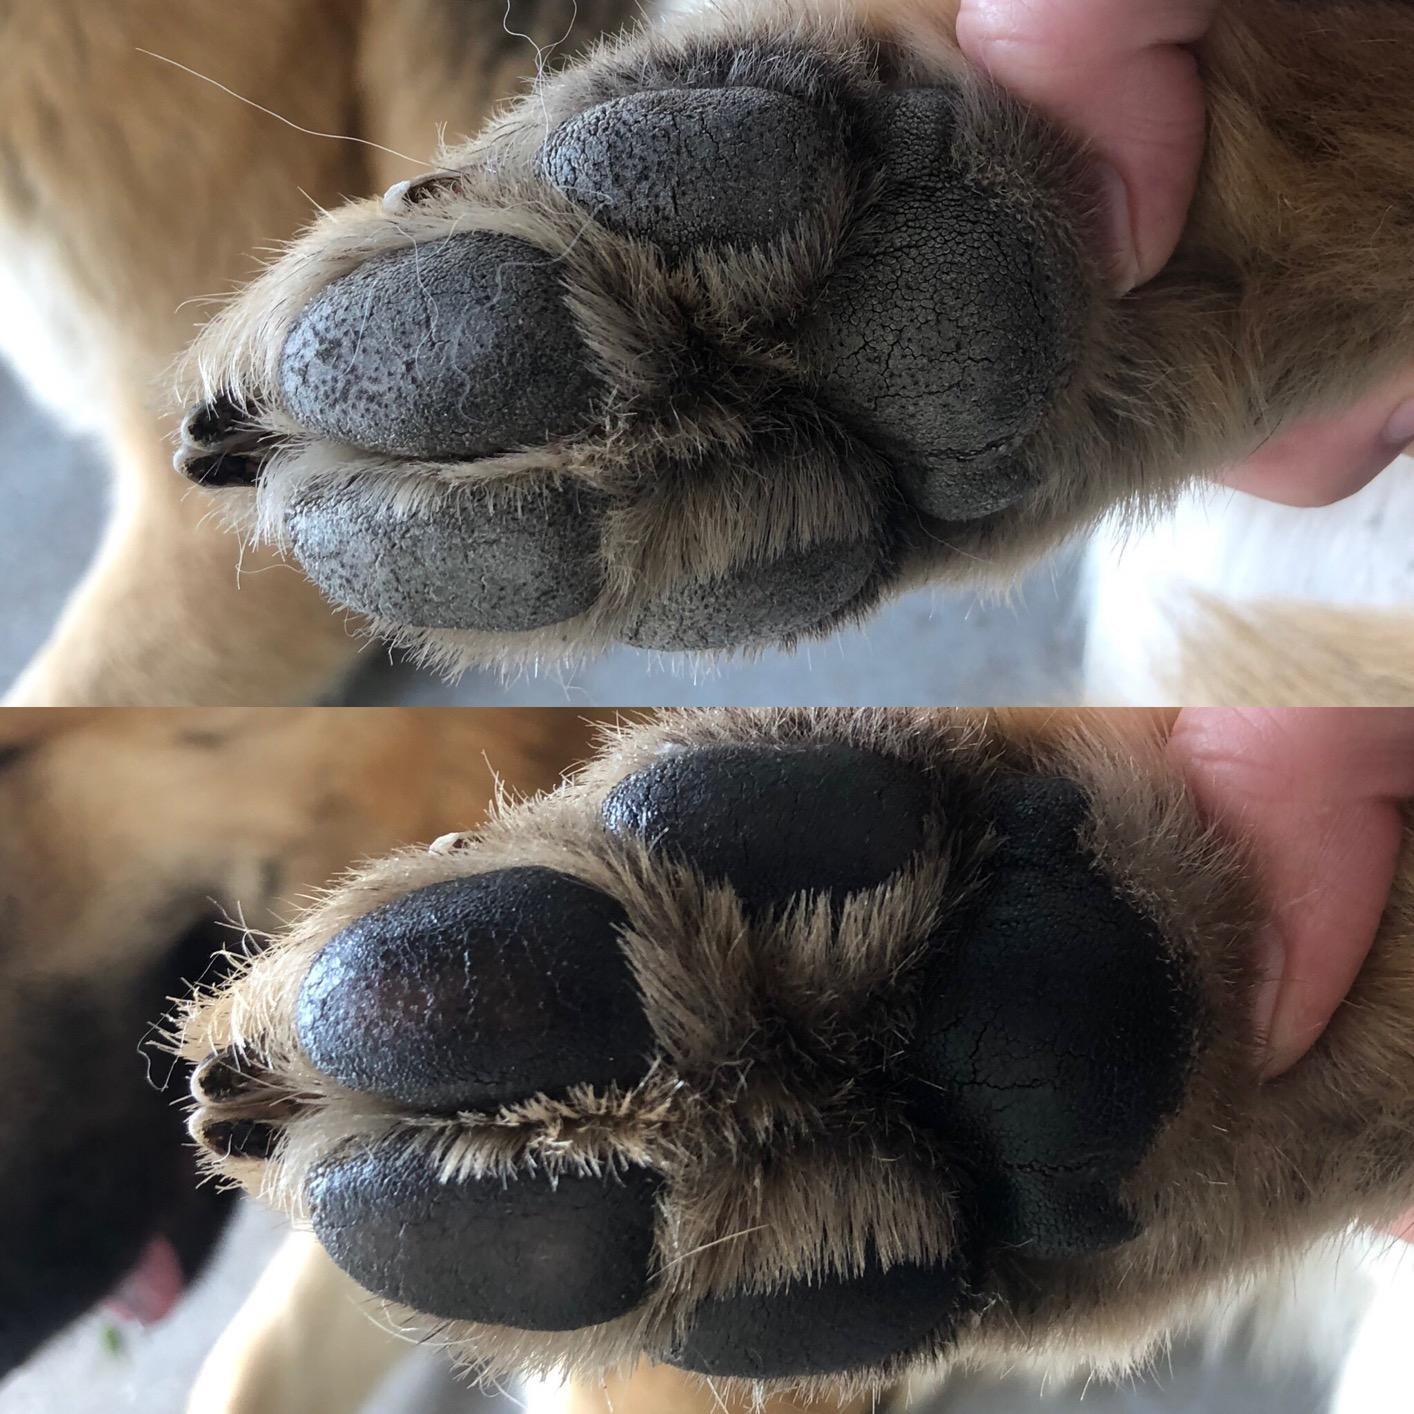 Before photo of a dog's paw pads looking dry next to an after photo of the same dog's paws looking moisturized after applying the balm